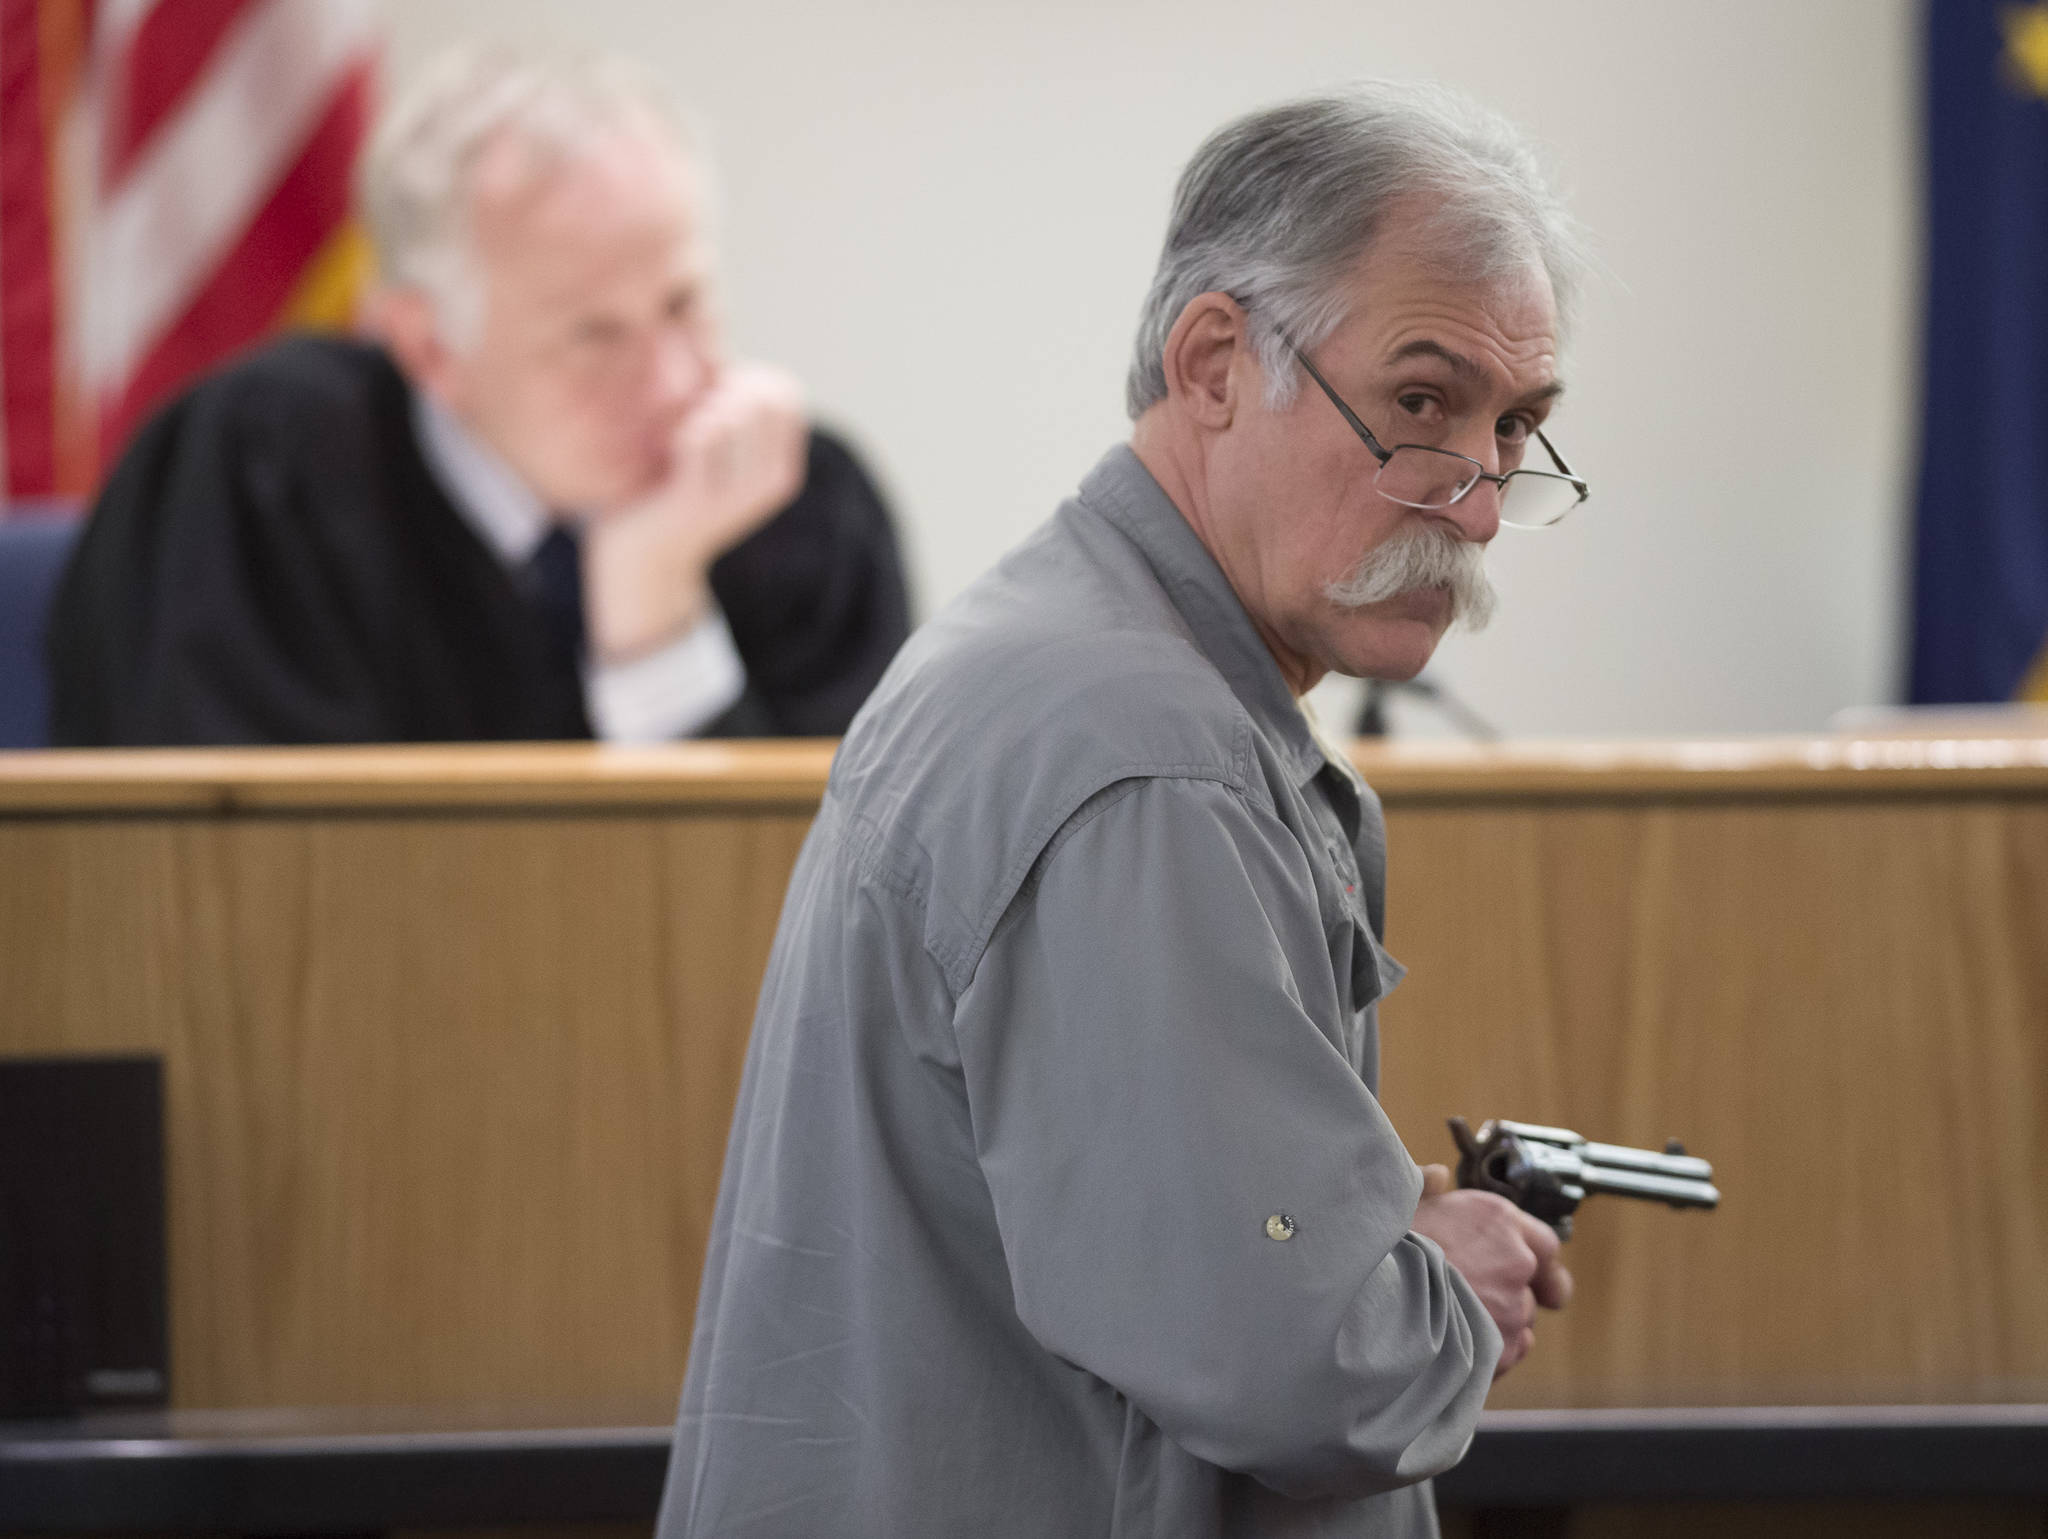 Chad Kendrick, a local firearms instructor and owner of Juneau gun and ammunition store Taku Tactical, is watched by Judge Philip Pallenberg during the trial of Mark De Simone in Juneau Superior Court on Wednesday, May 9, 2018. De Simone is accused of killing Duilio Antonio “Tony” Rosales during a hunting trip in Excursion Inlet in 2016. (Michael Penn | Juneau Empire)